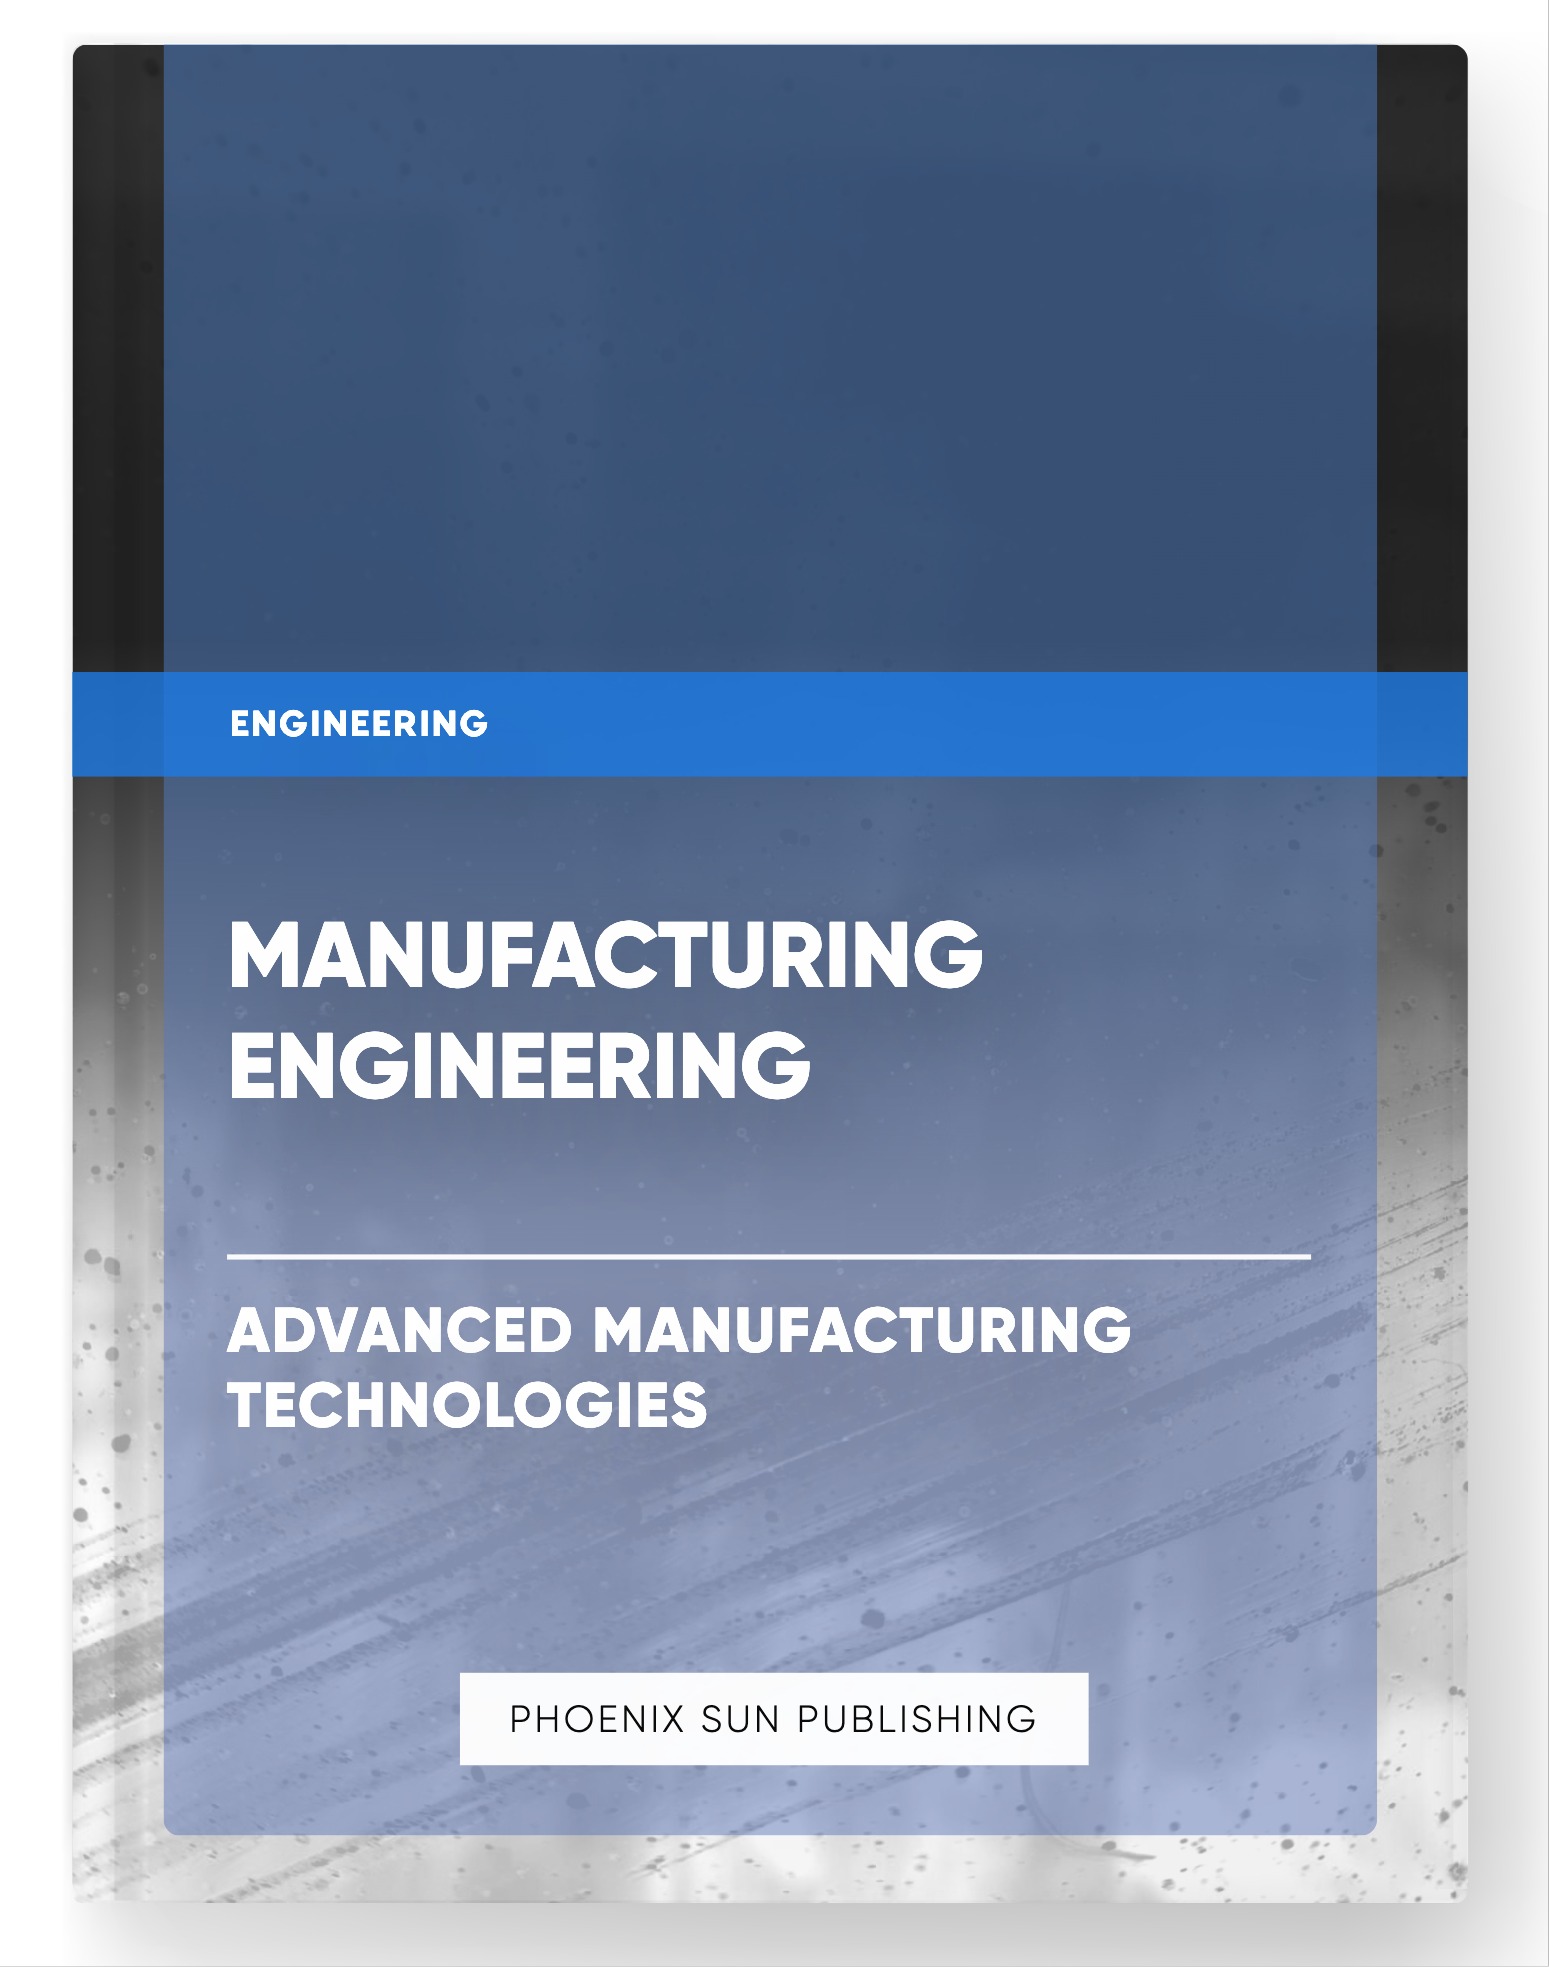 Manufacturing Engineering – Advanced Manufacturing Technologies